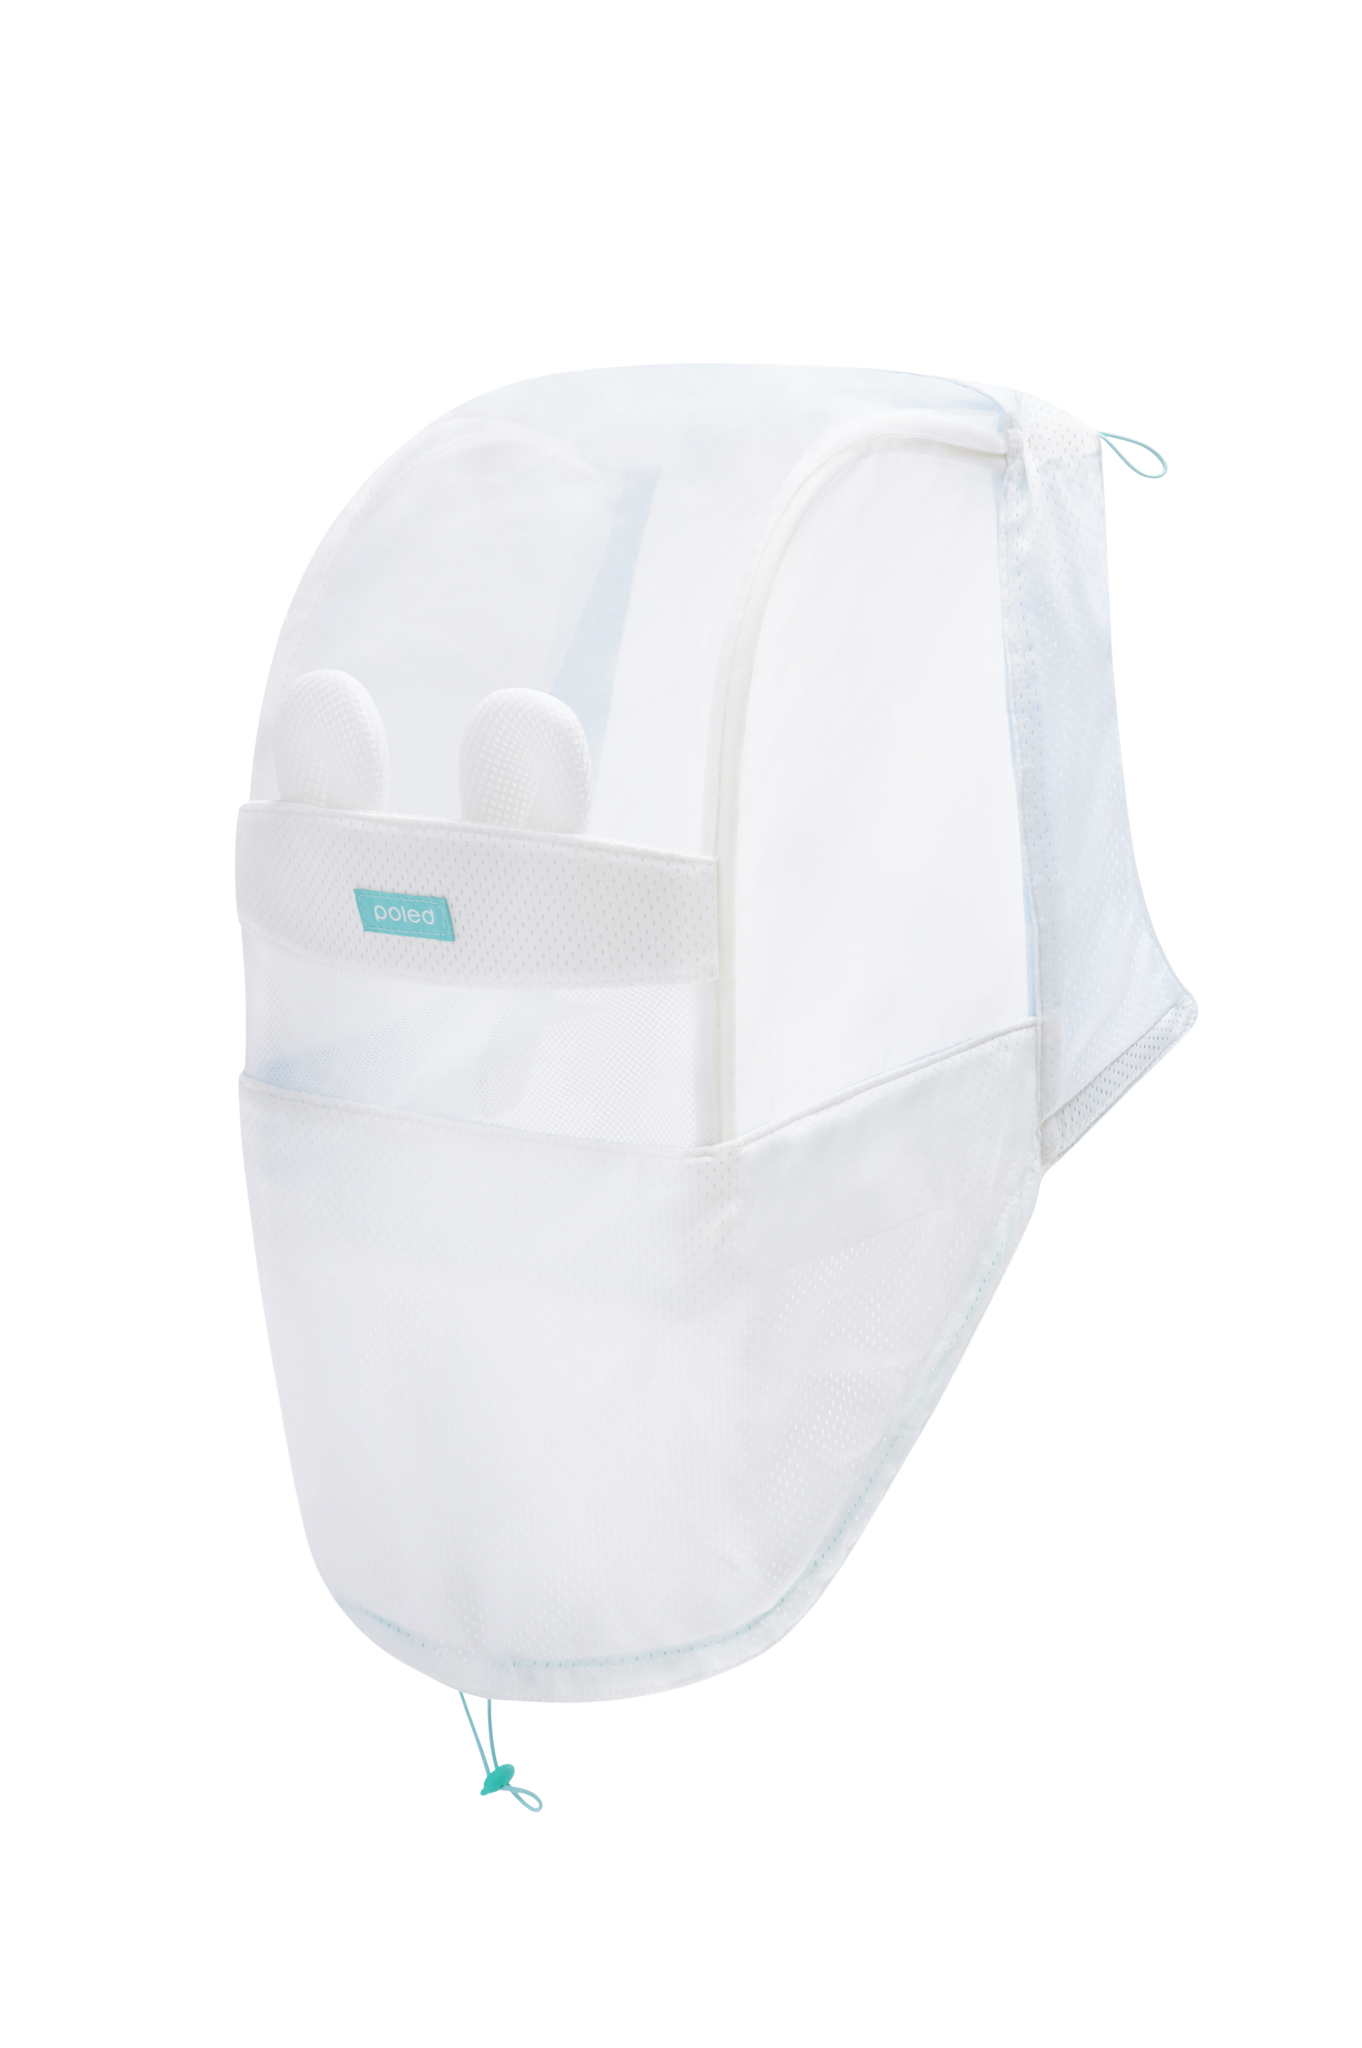 Poled airluv baby carrier mask エアラブ マスク 高品質の人気 - その他